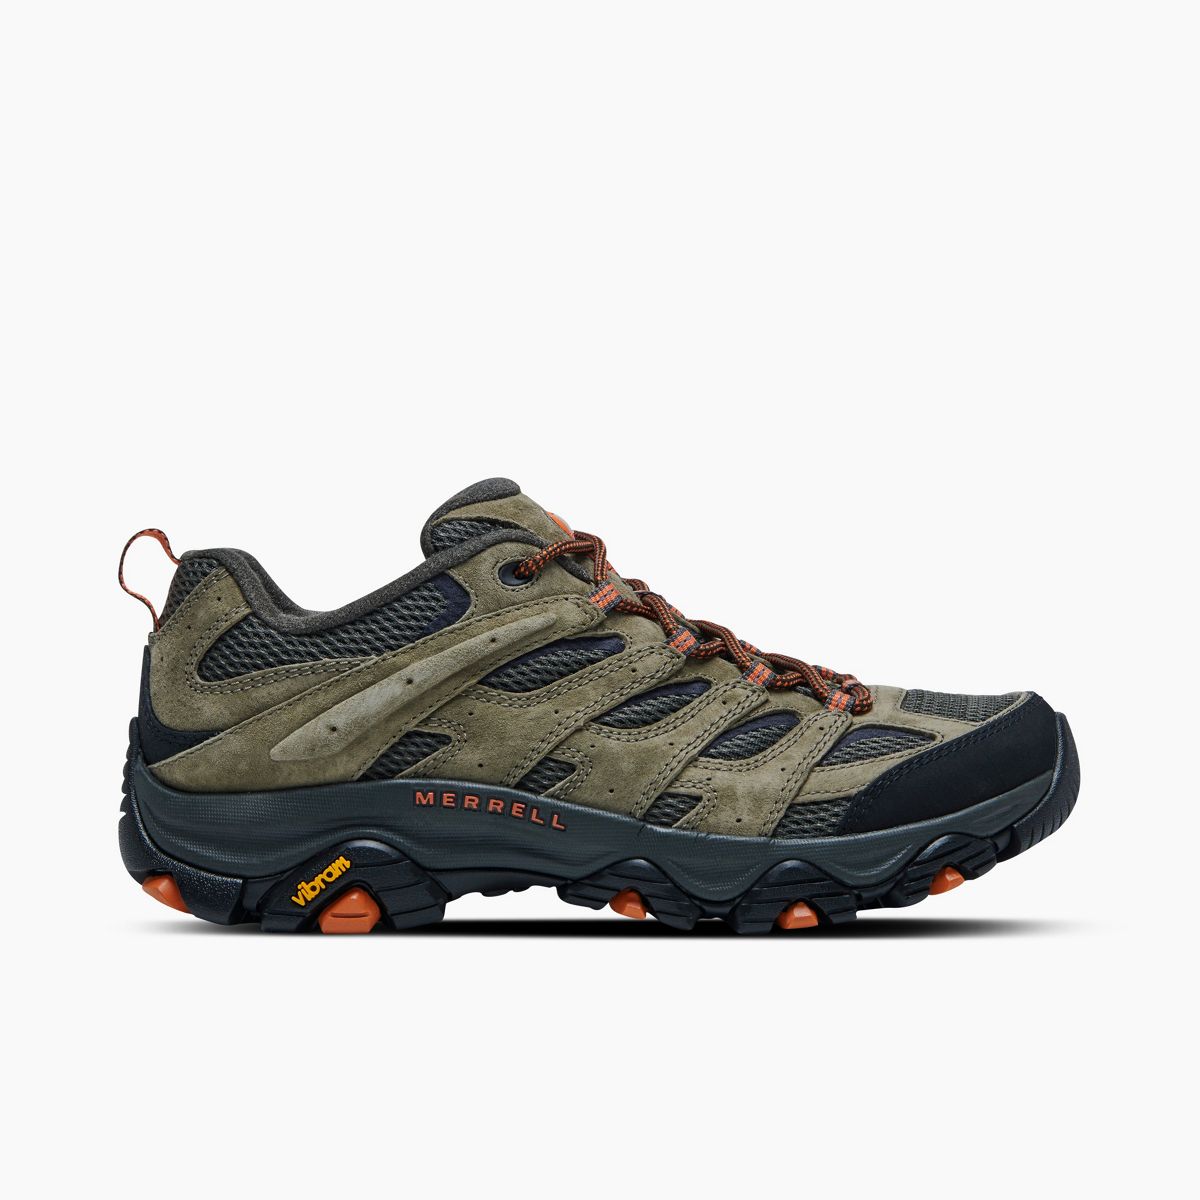  Trekking & Hiking: Clothing, Shoes & Accessories: Shoes, Boots,  Hiking Footwear & More